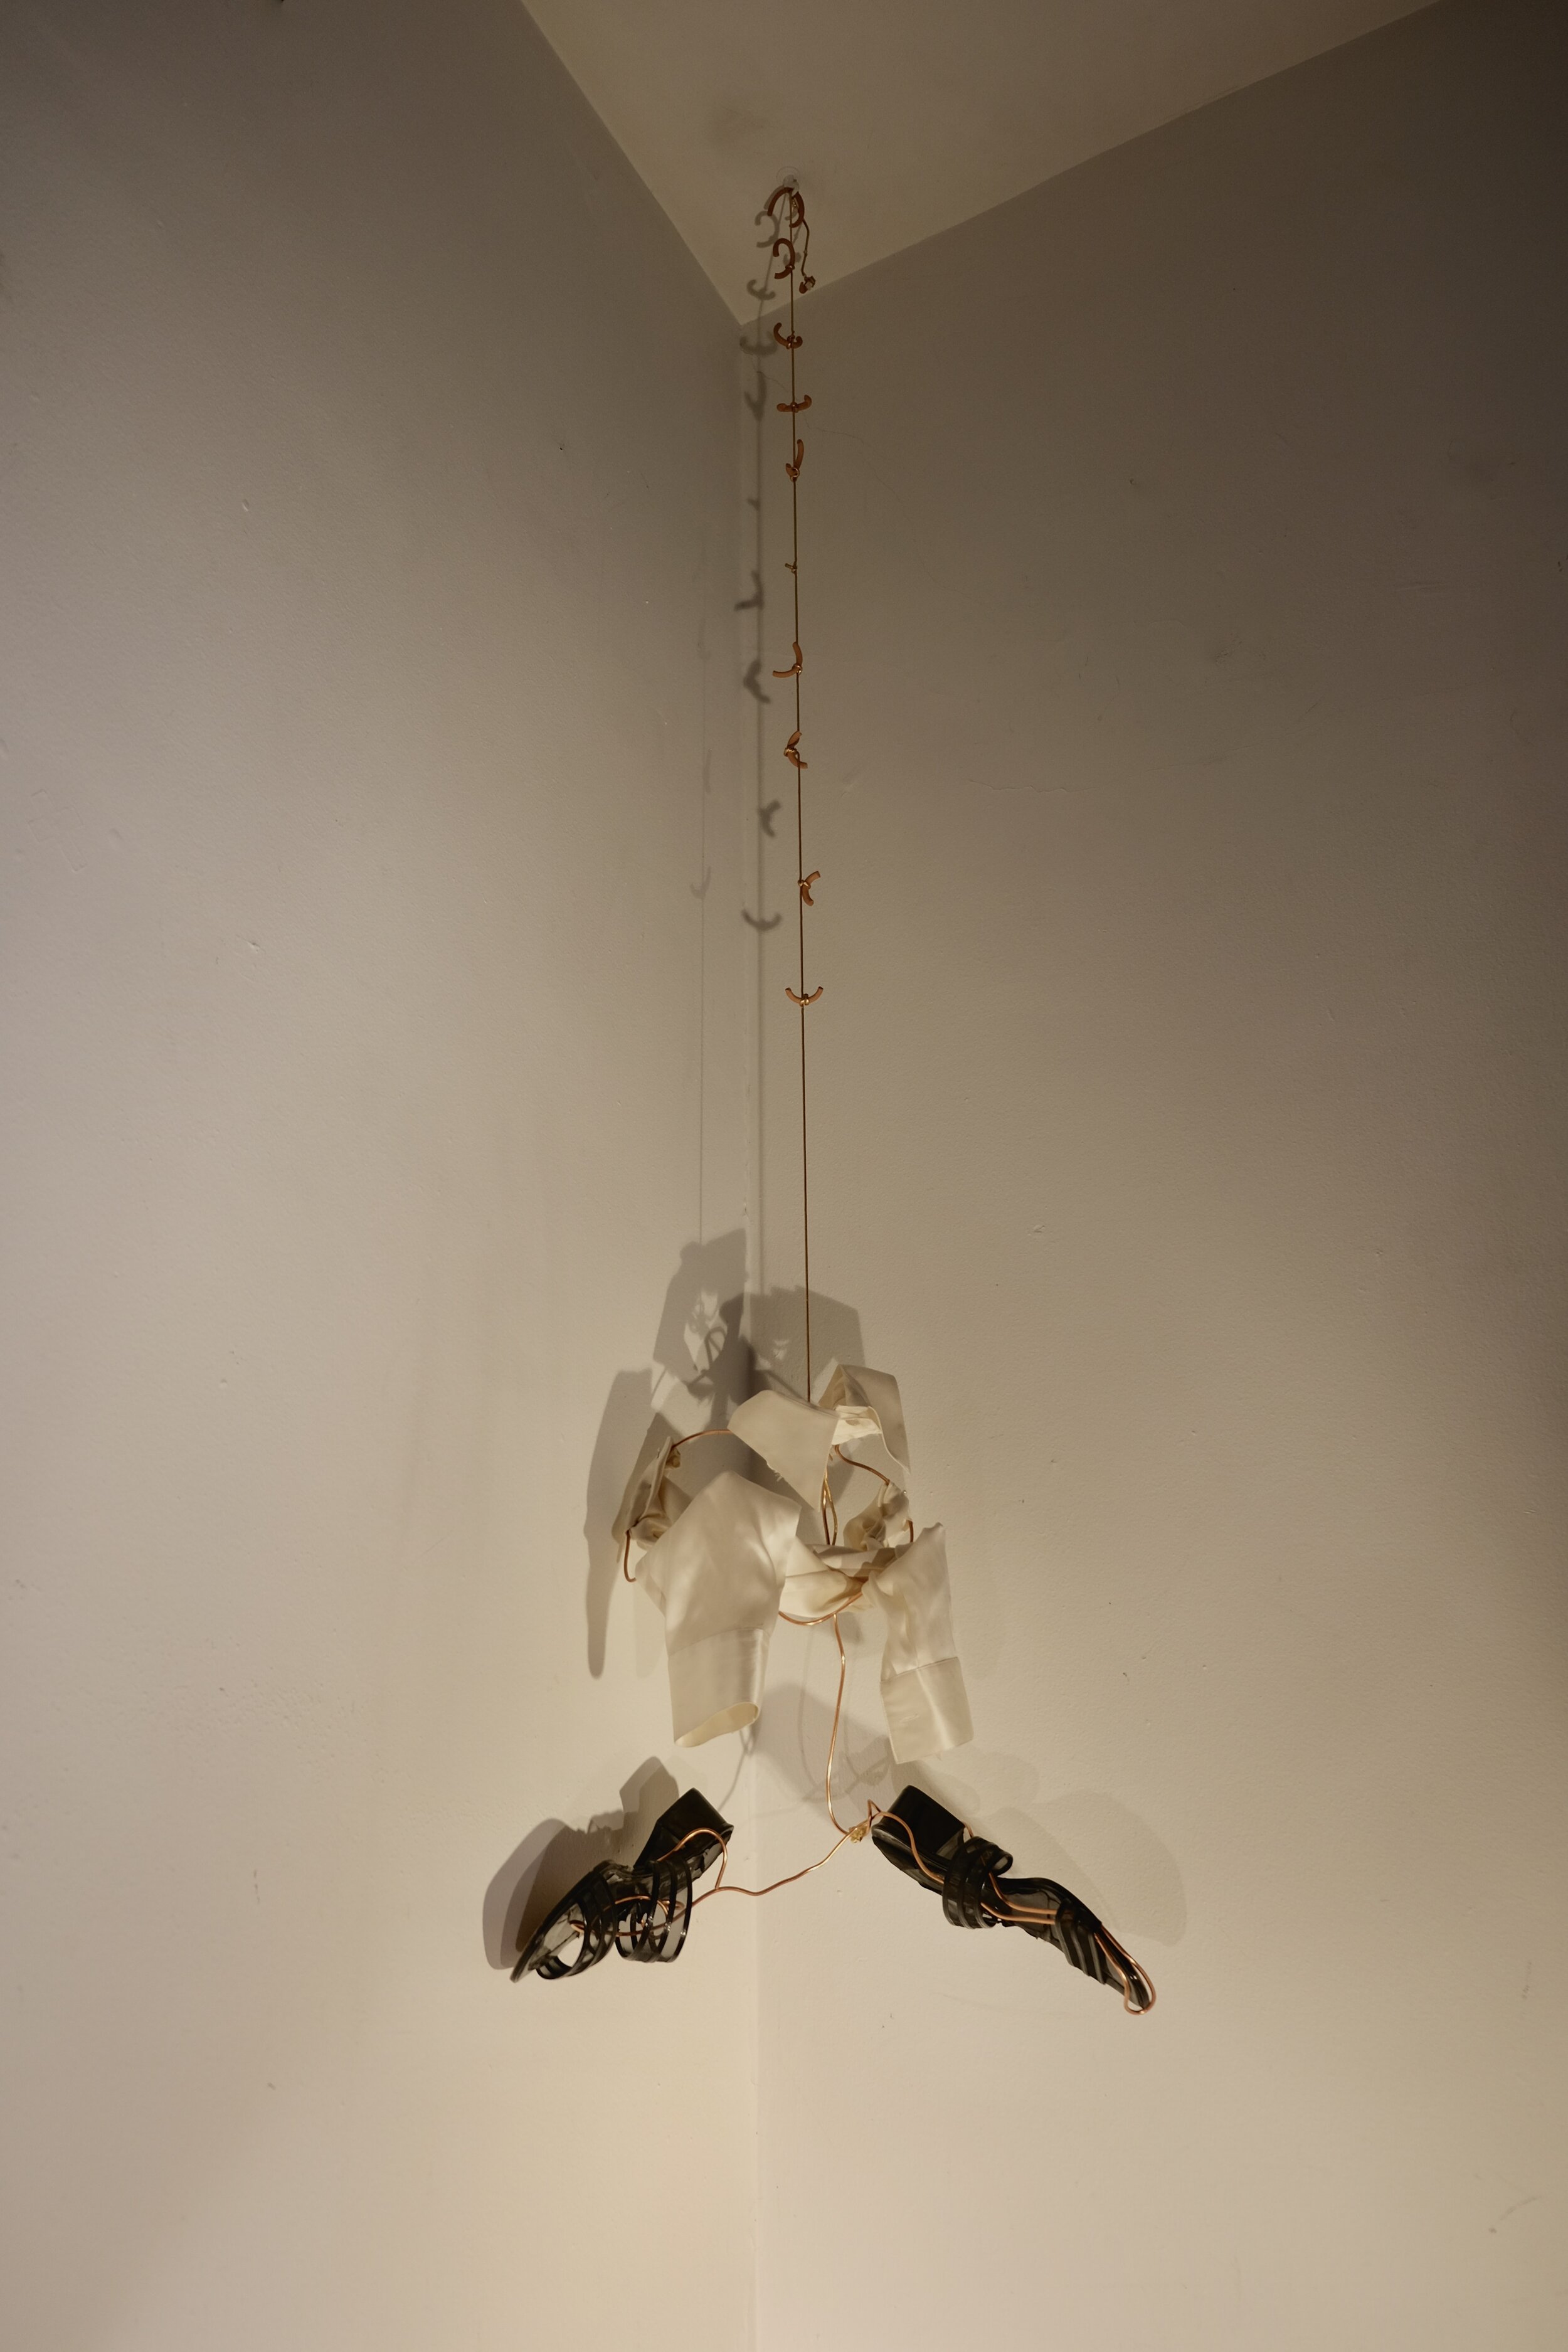   A Lonely While , 2020  ceramic, satin, copper wire, shoes, gold cord 